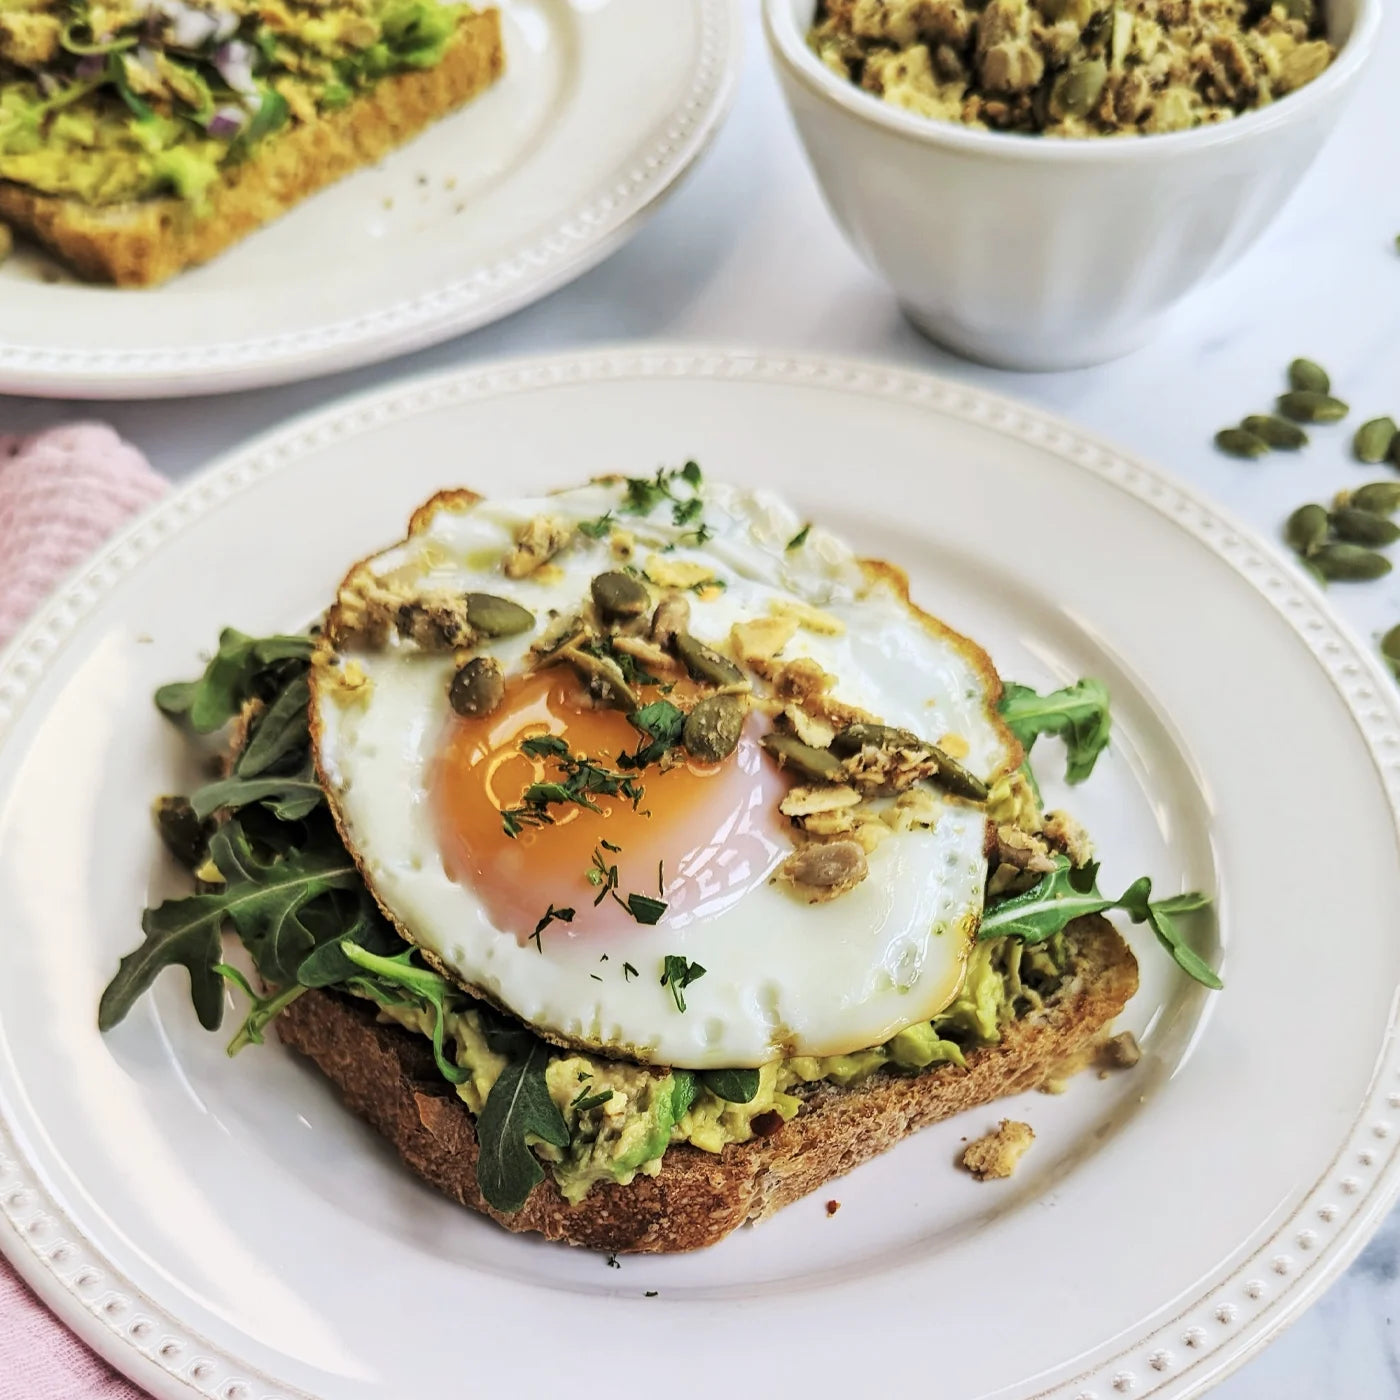 A rich avocado toast topped with micro greens, a fried egg and Struesli's savory + seed granola.